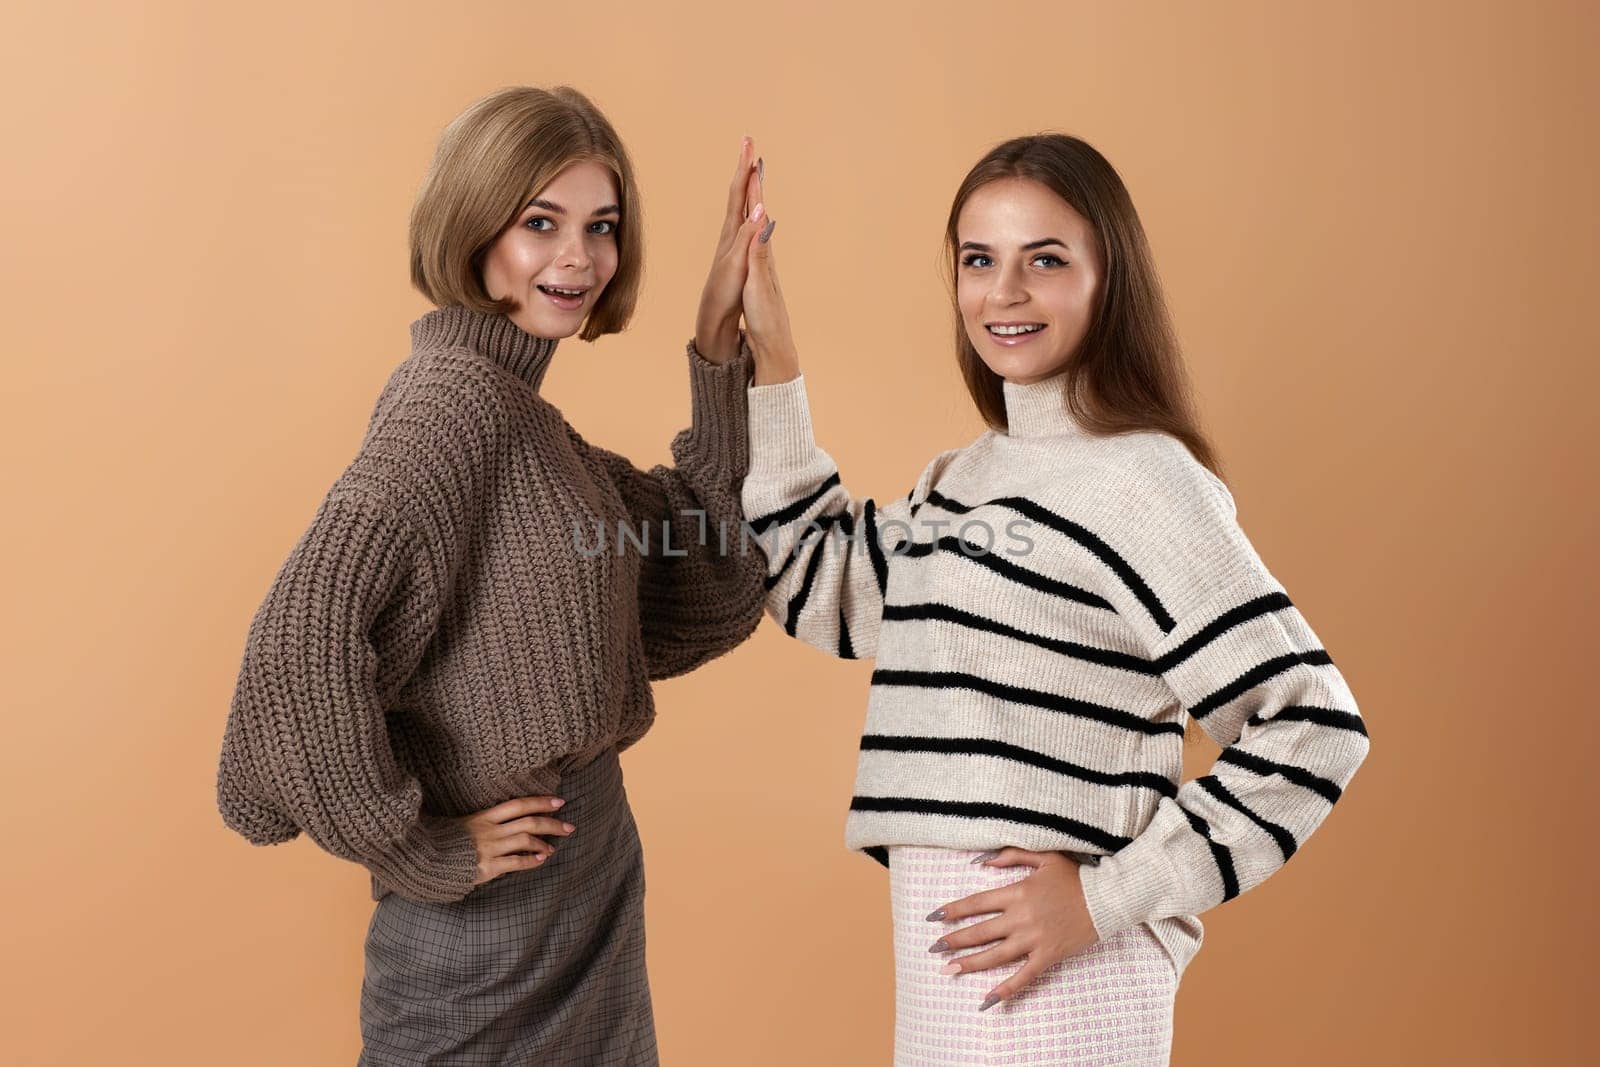 two young women friends giving high five hold hands on beige background